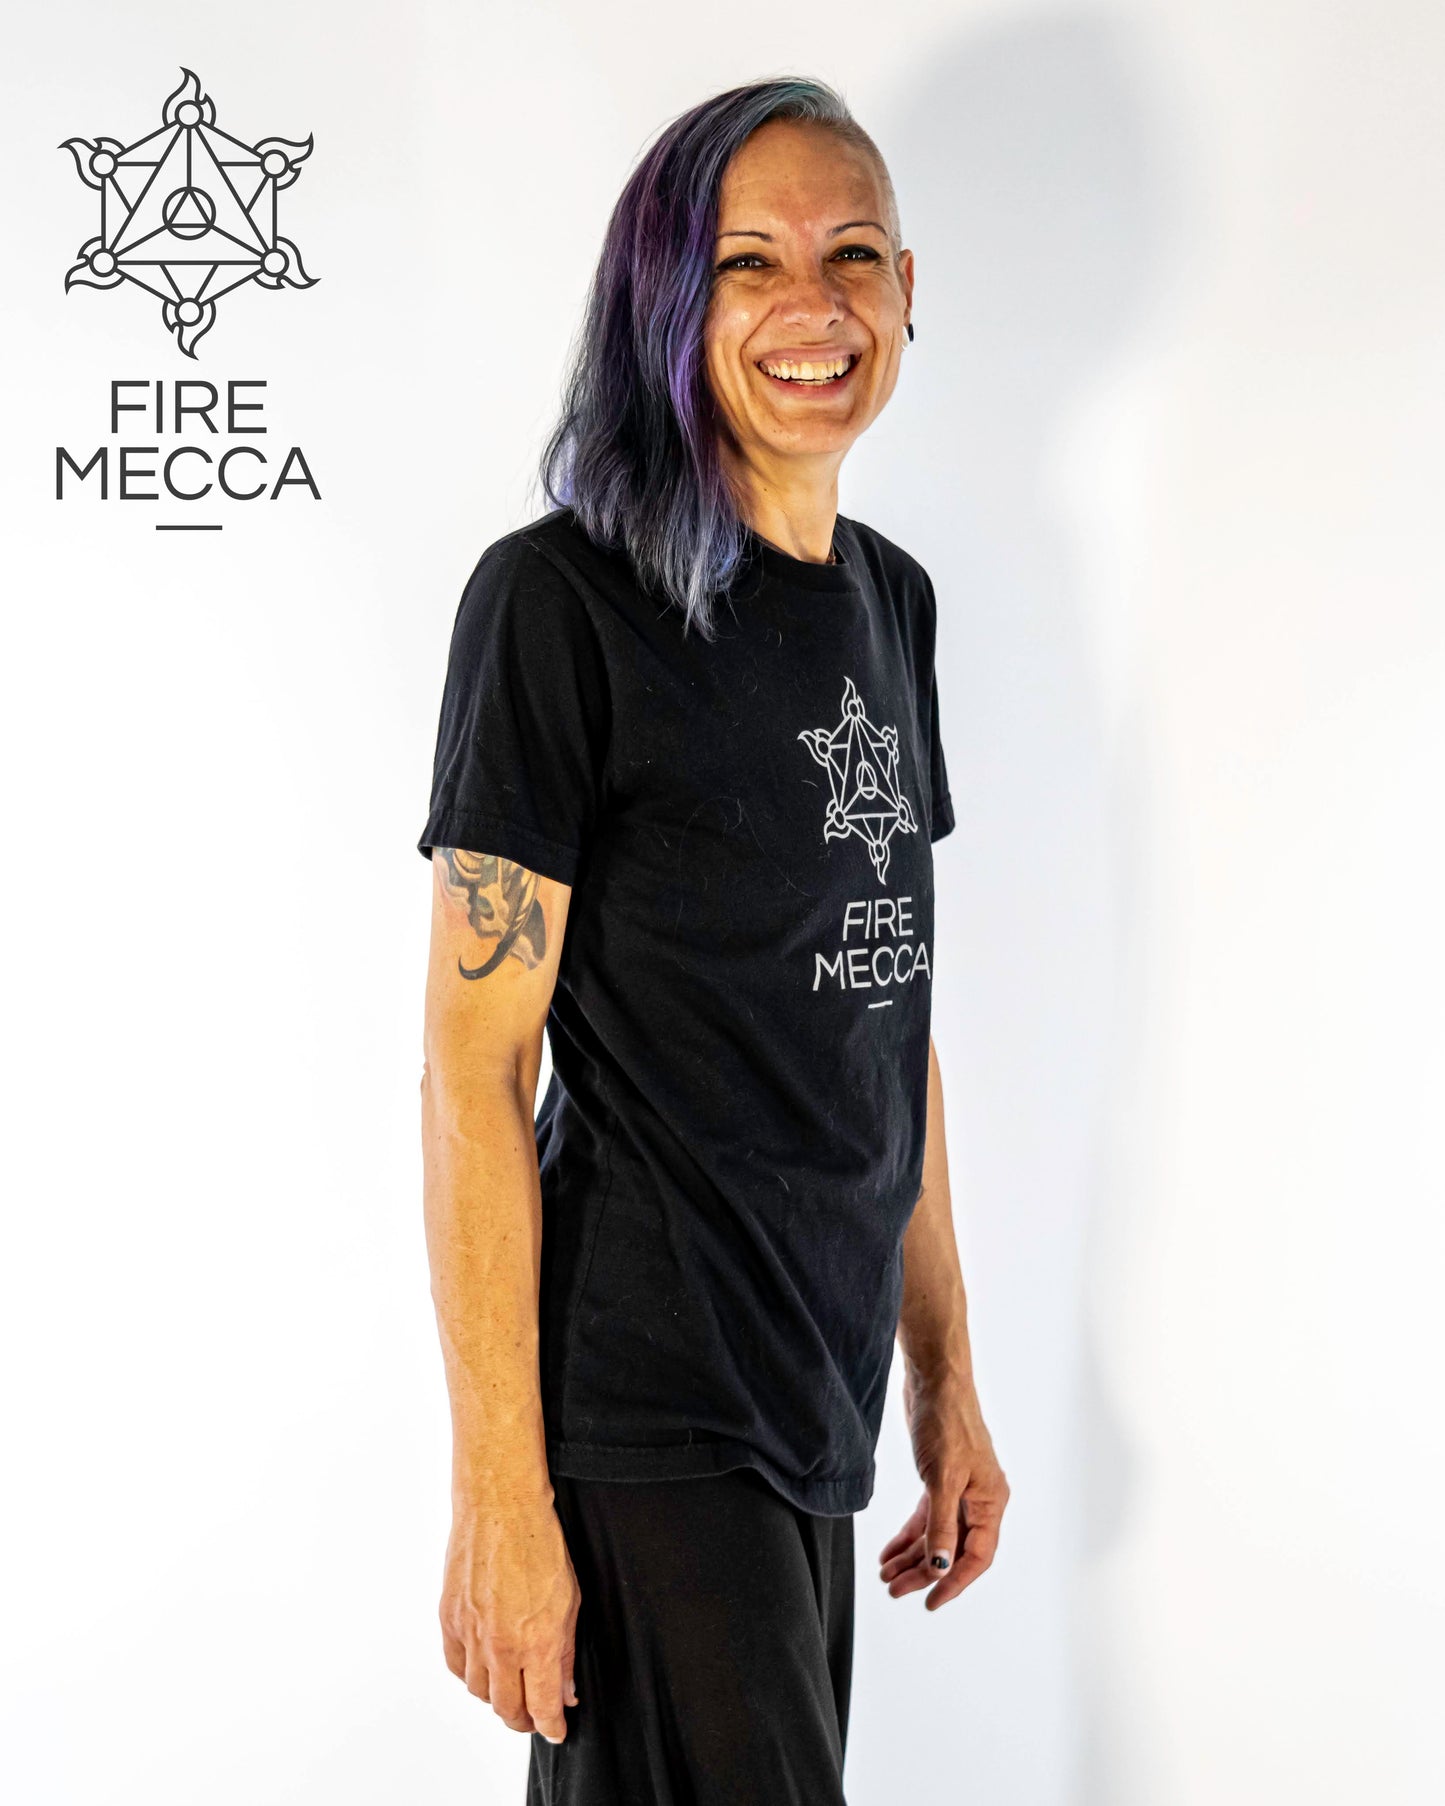 FIRE_MECCA_T-Shirt_100_Cotton_Fire_Resistant_Ink_Performer_Conclave_Flow_Spinning_Circus_Dance_Festivals_Performances_-_Short-Sleeve_T-Shirt